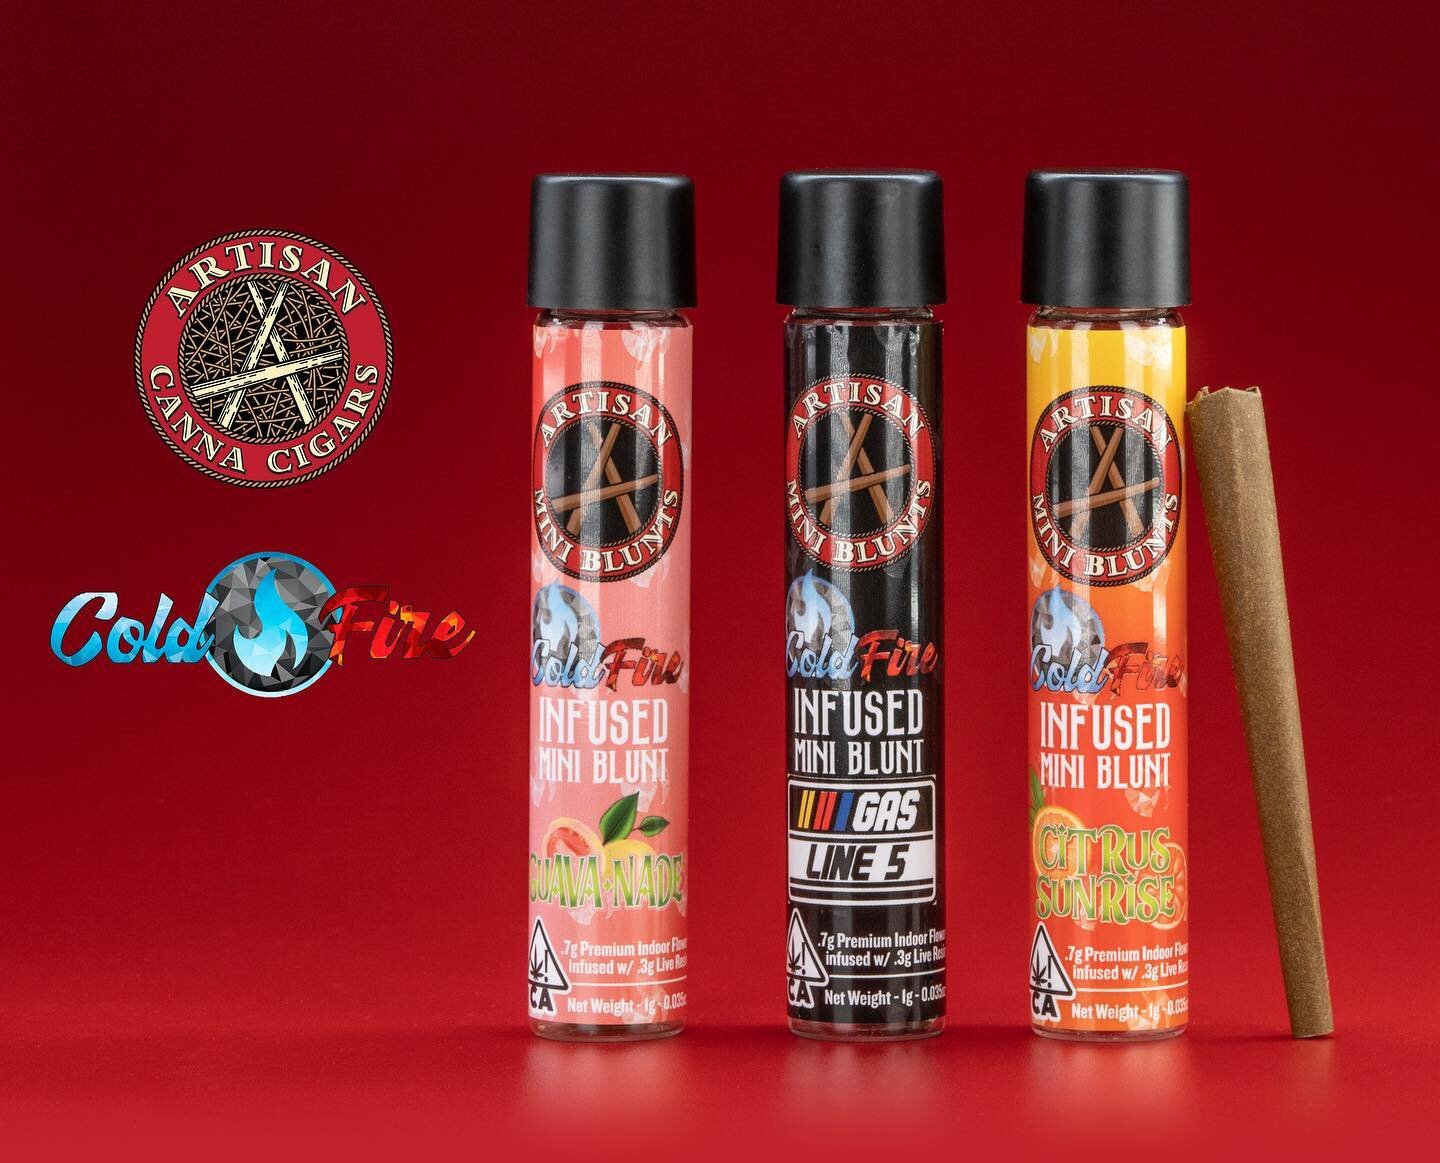 These new @coldfireextractzs Infused Mini Blunts go nuts! #GuavaNade #GasLine5 &amp; #CitrusSunrise.